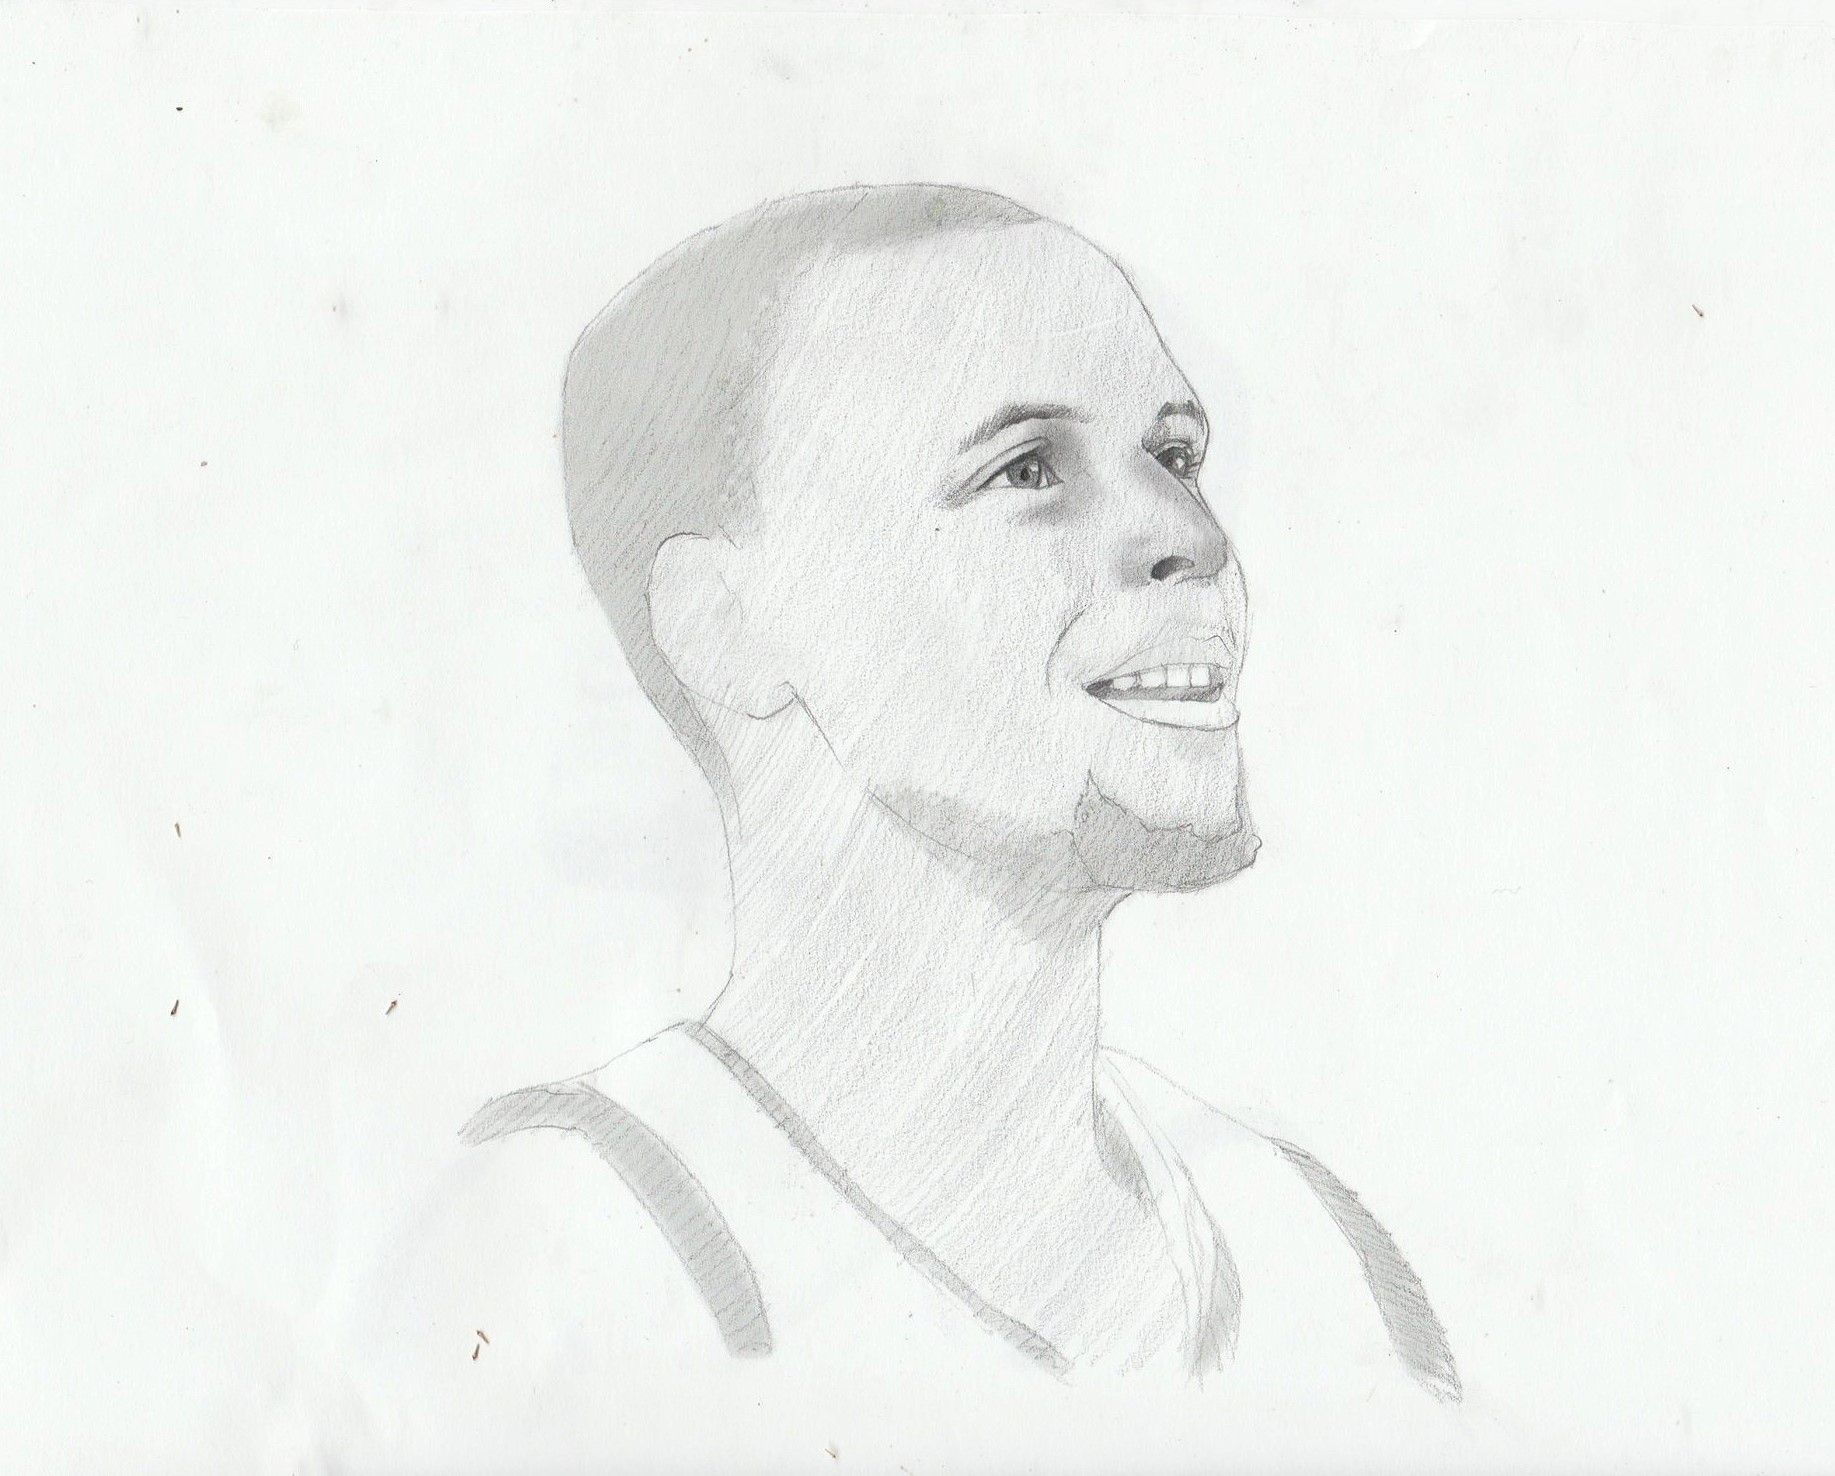 Portrait Of Stephen Curry - My NBA Fave Basketball Player...Plus My ...